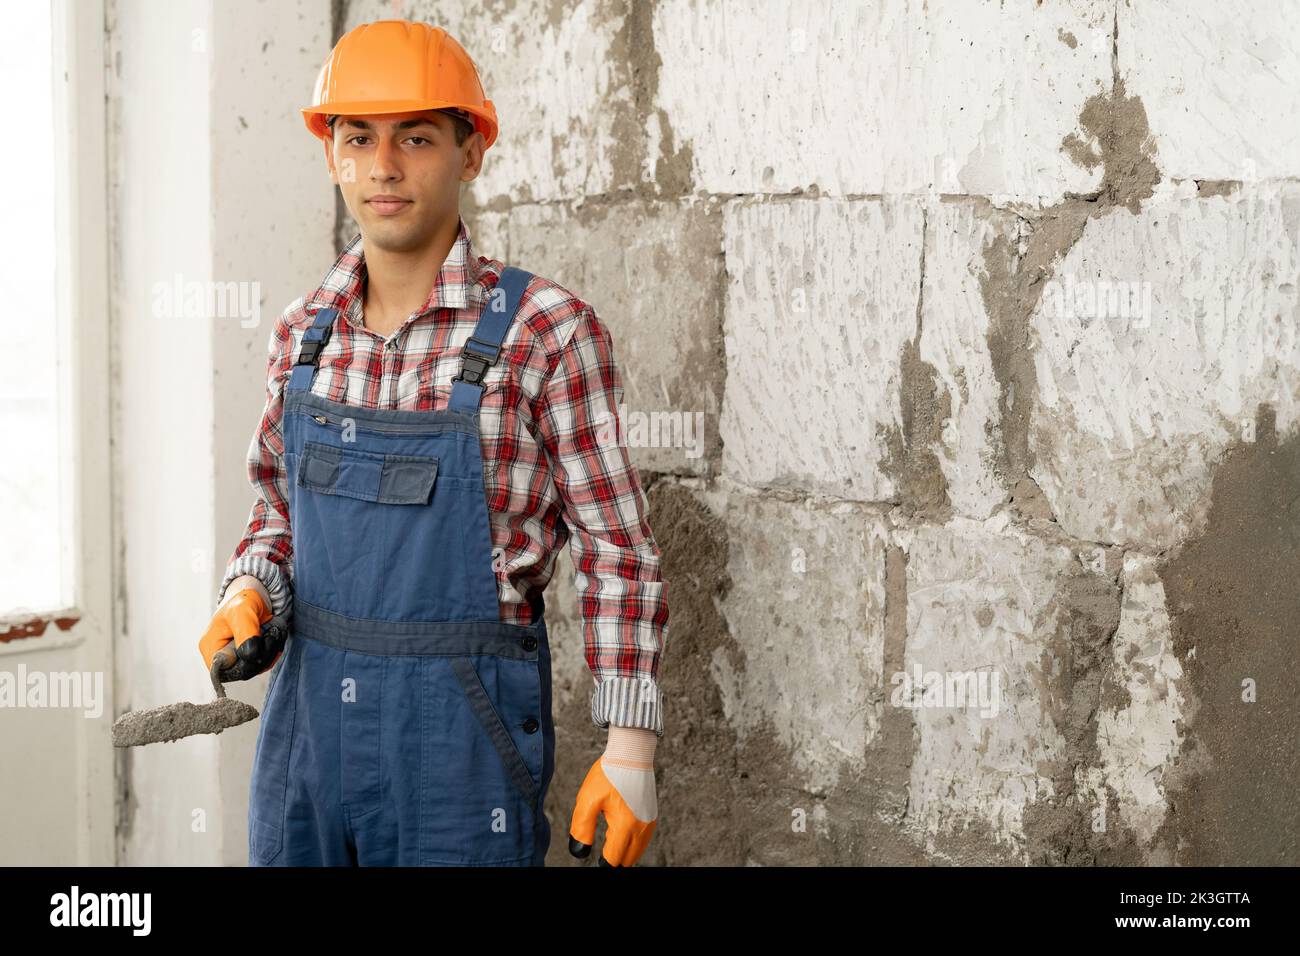 Arabic man master plasters the walls, portrait of builder in hard hat making repairs in the apartment, the concept of repairing and remodeling the hou Stock Photo